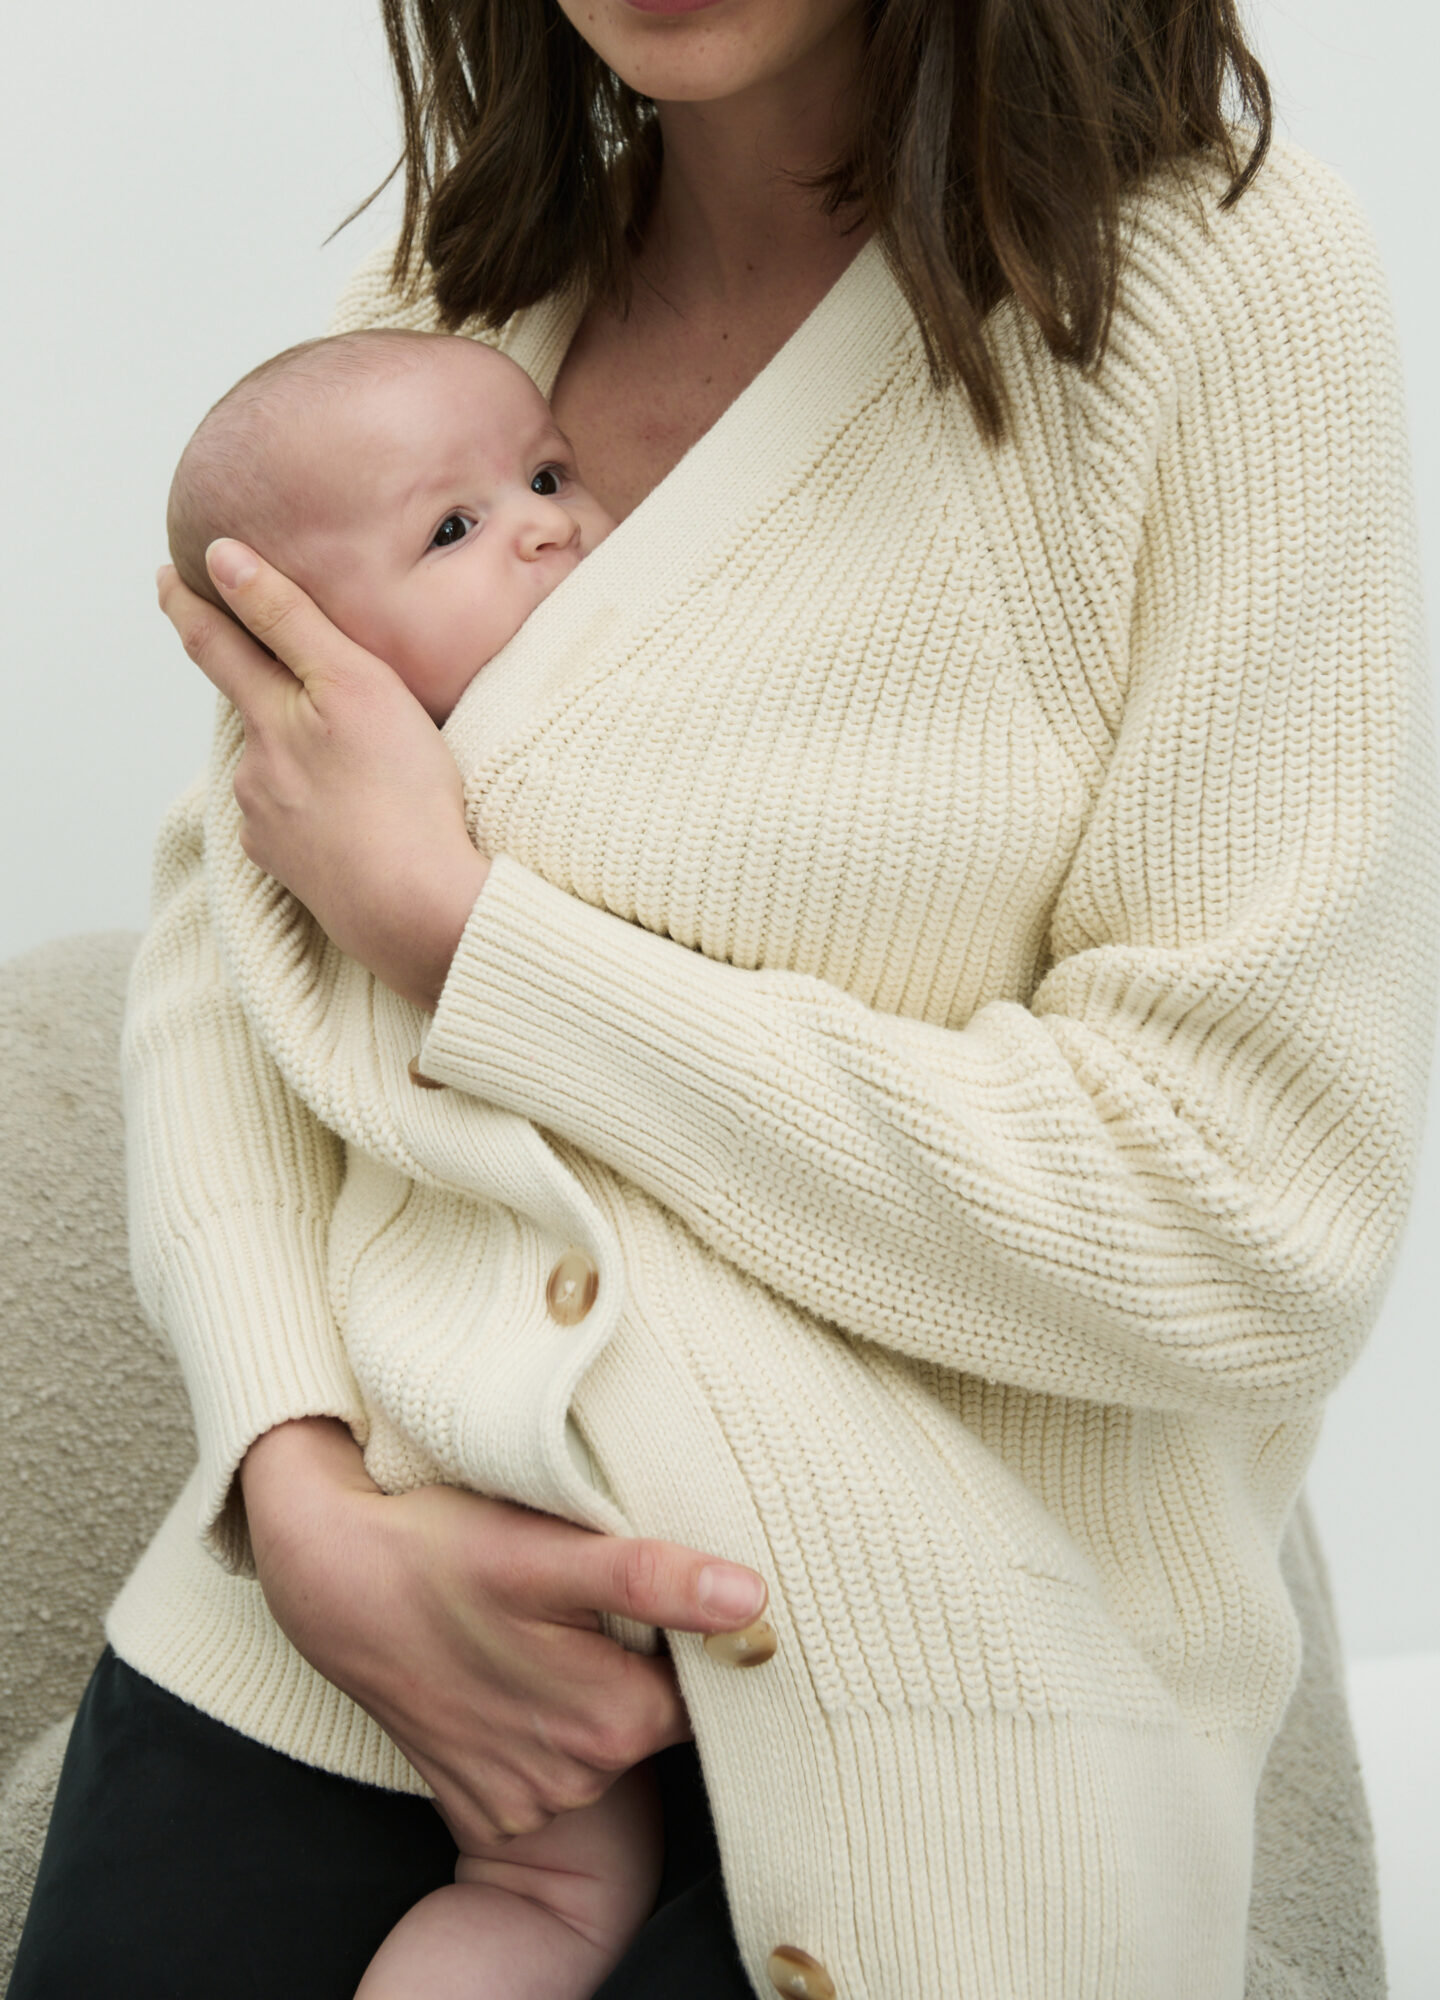 3rd Trimester Survival Kit: My 15 Must Haves —